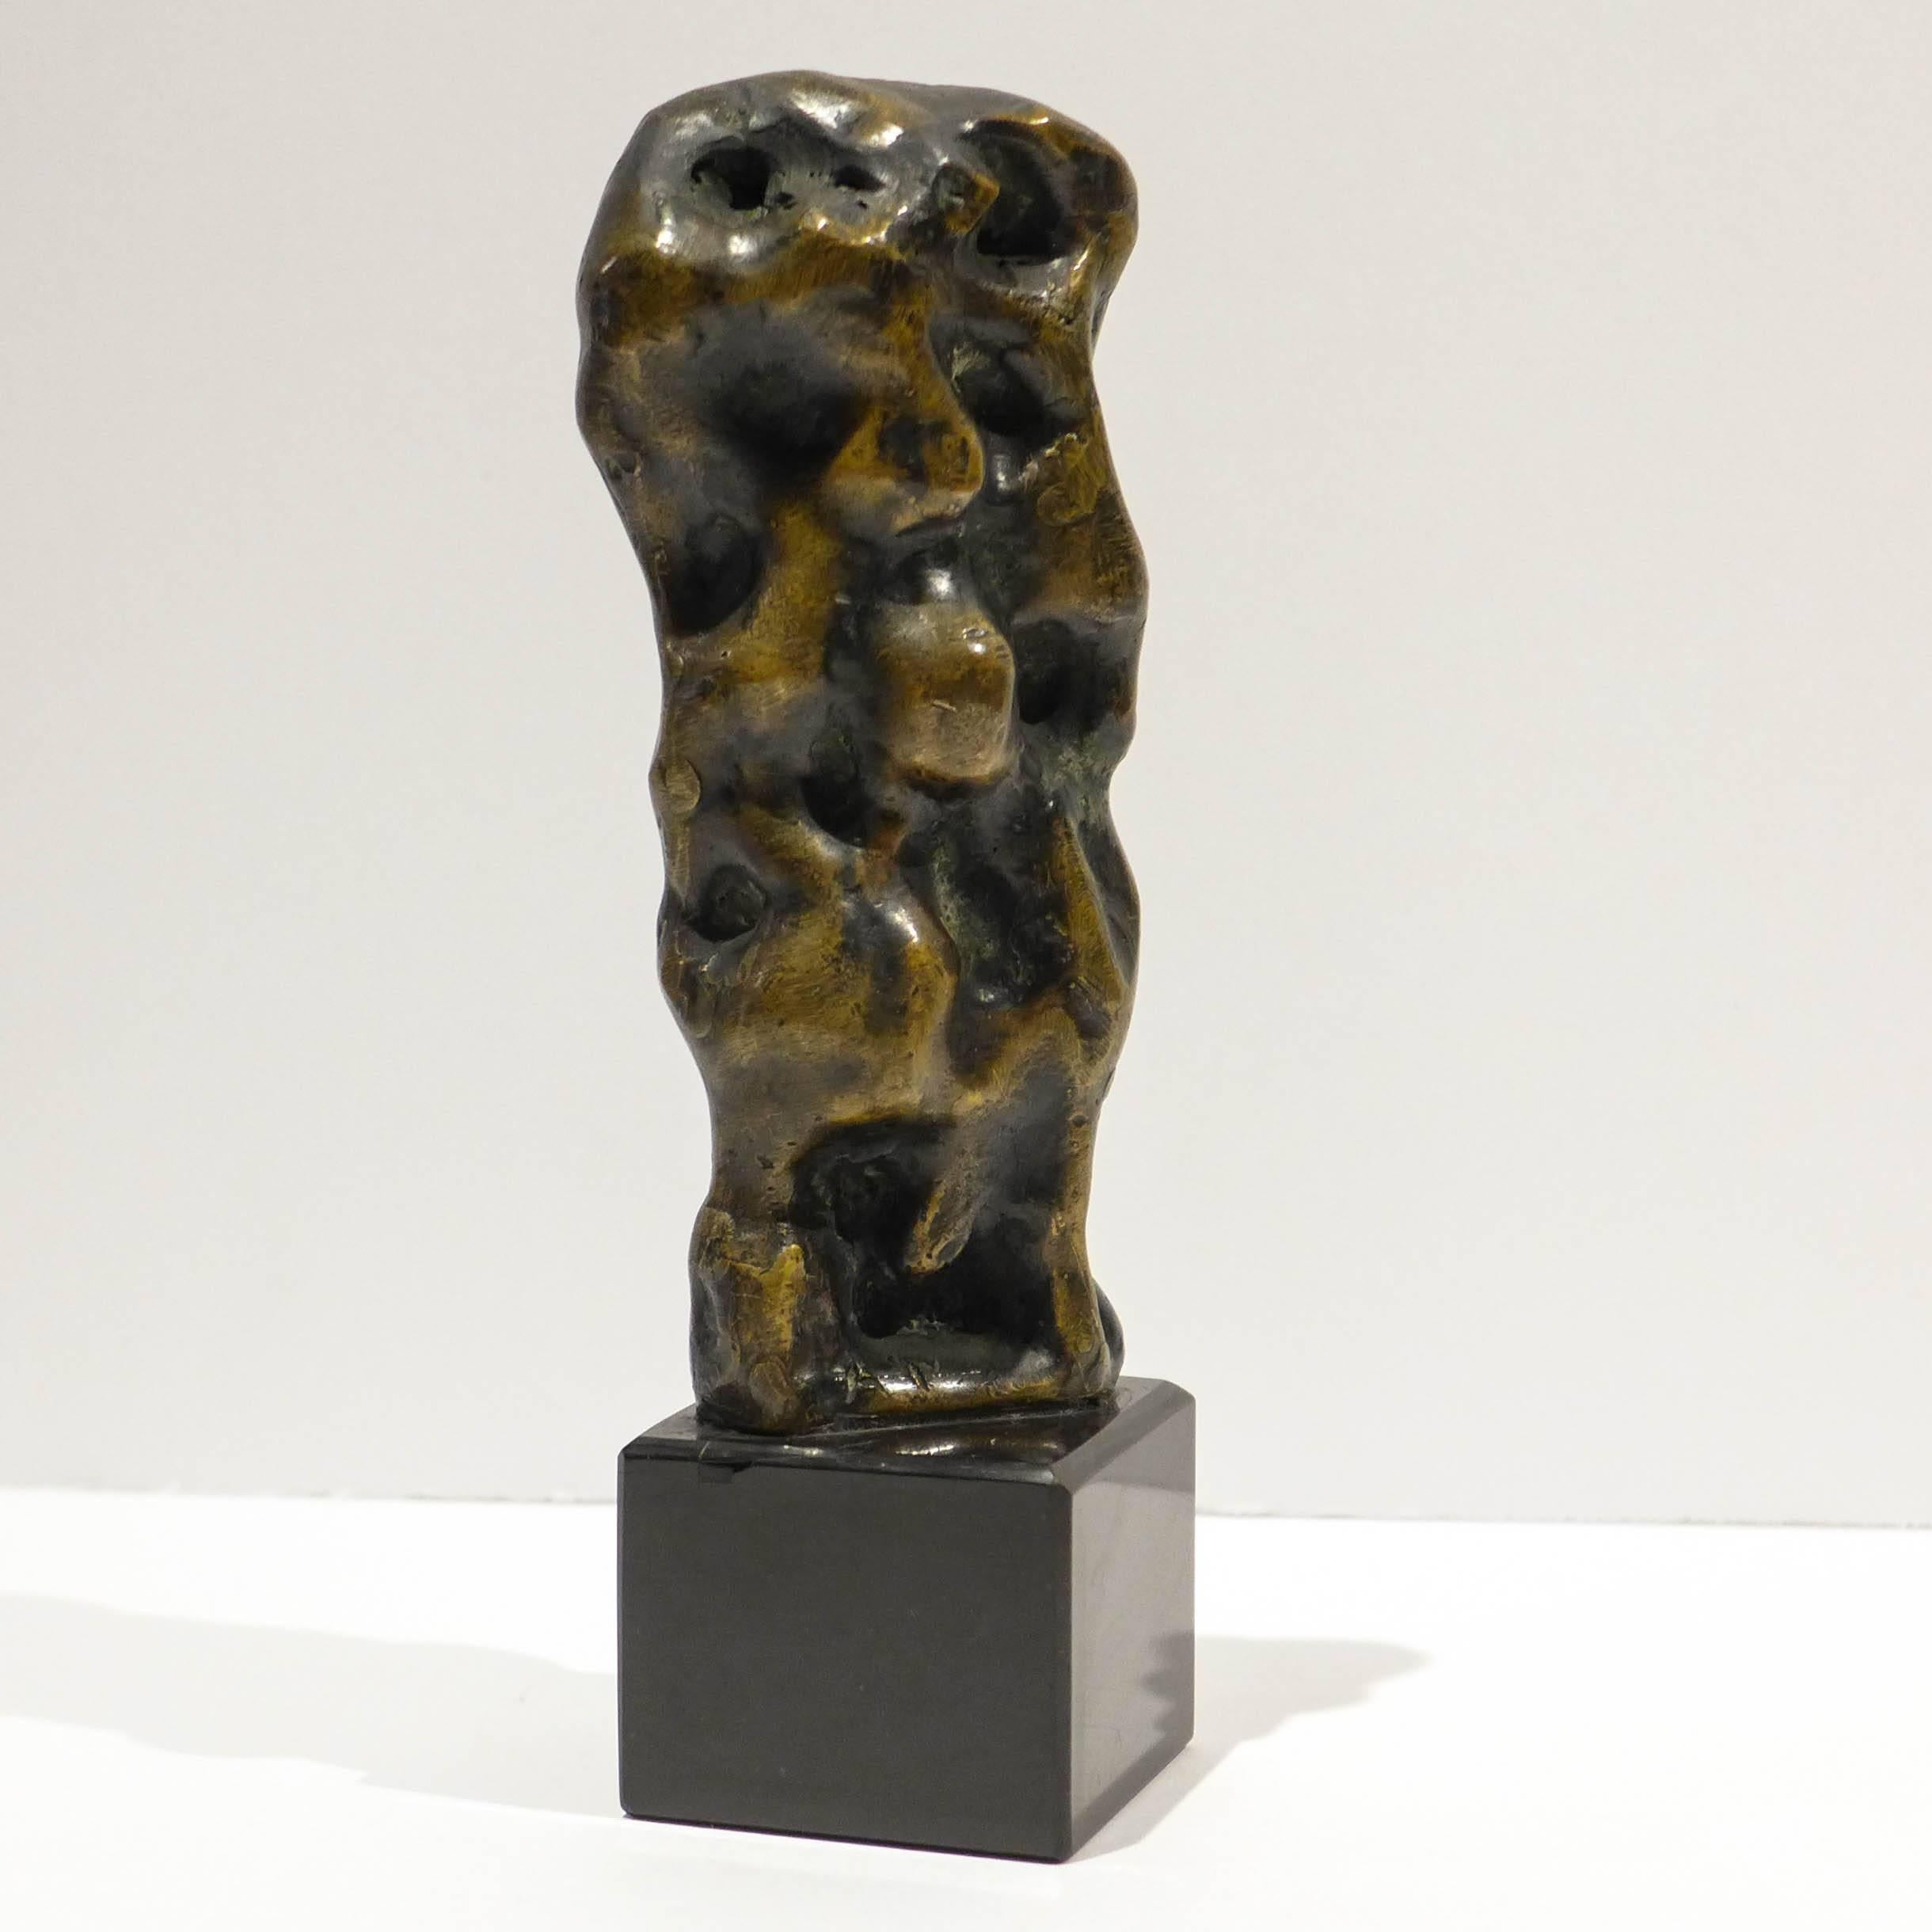 Small figural abstract cast bronze sculpture on black marble base by Chicago artist Abbott Pattison (1916-1999). After receiving his B.F.A. from Yale in 1939, and a stint in the Navy, Pattison returned to his native Chicago. From the 1950s through